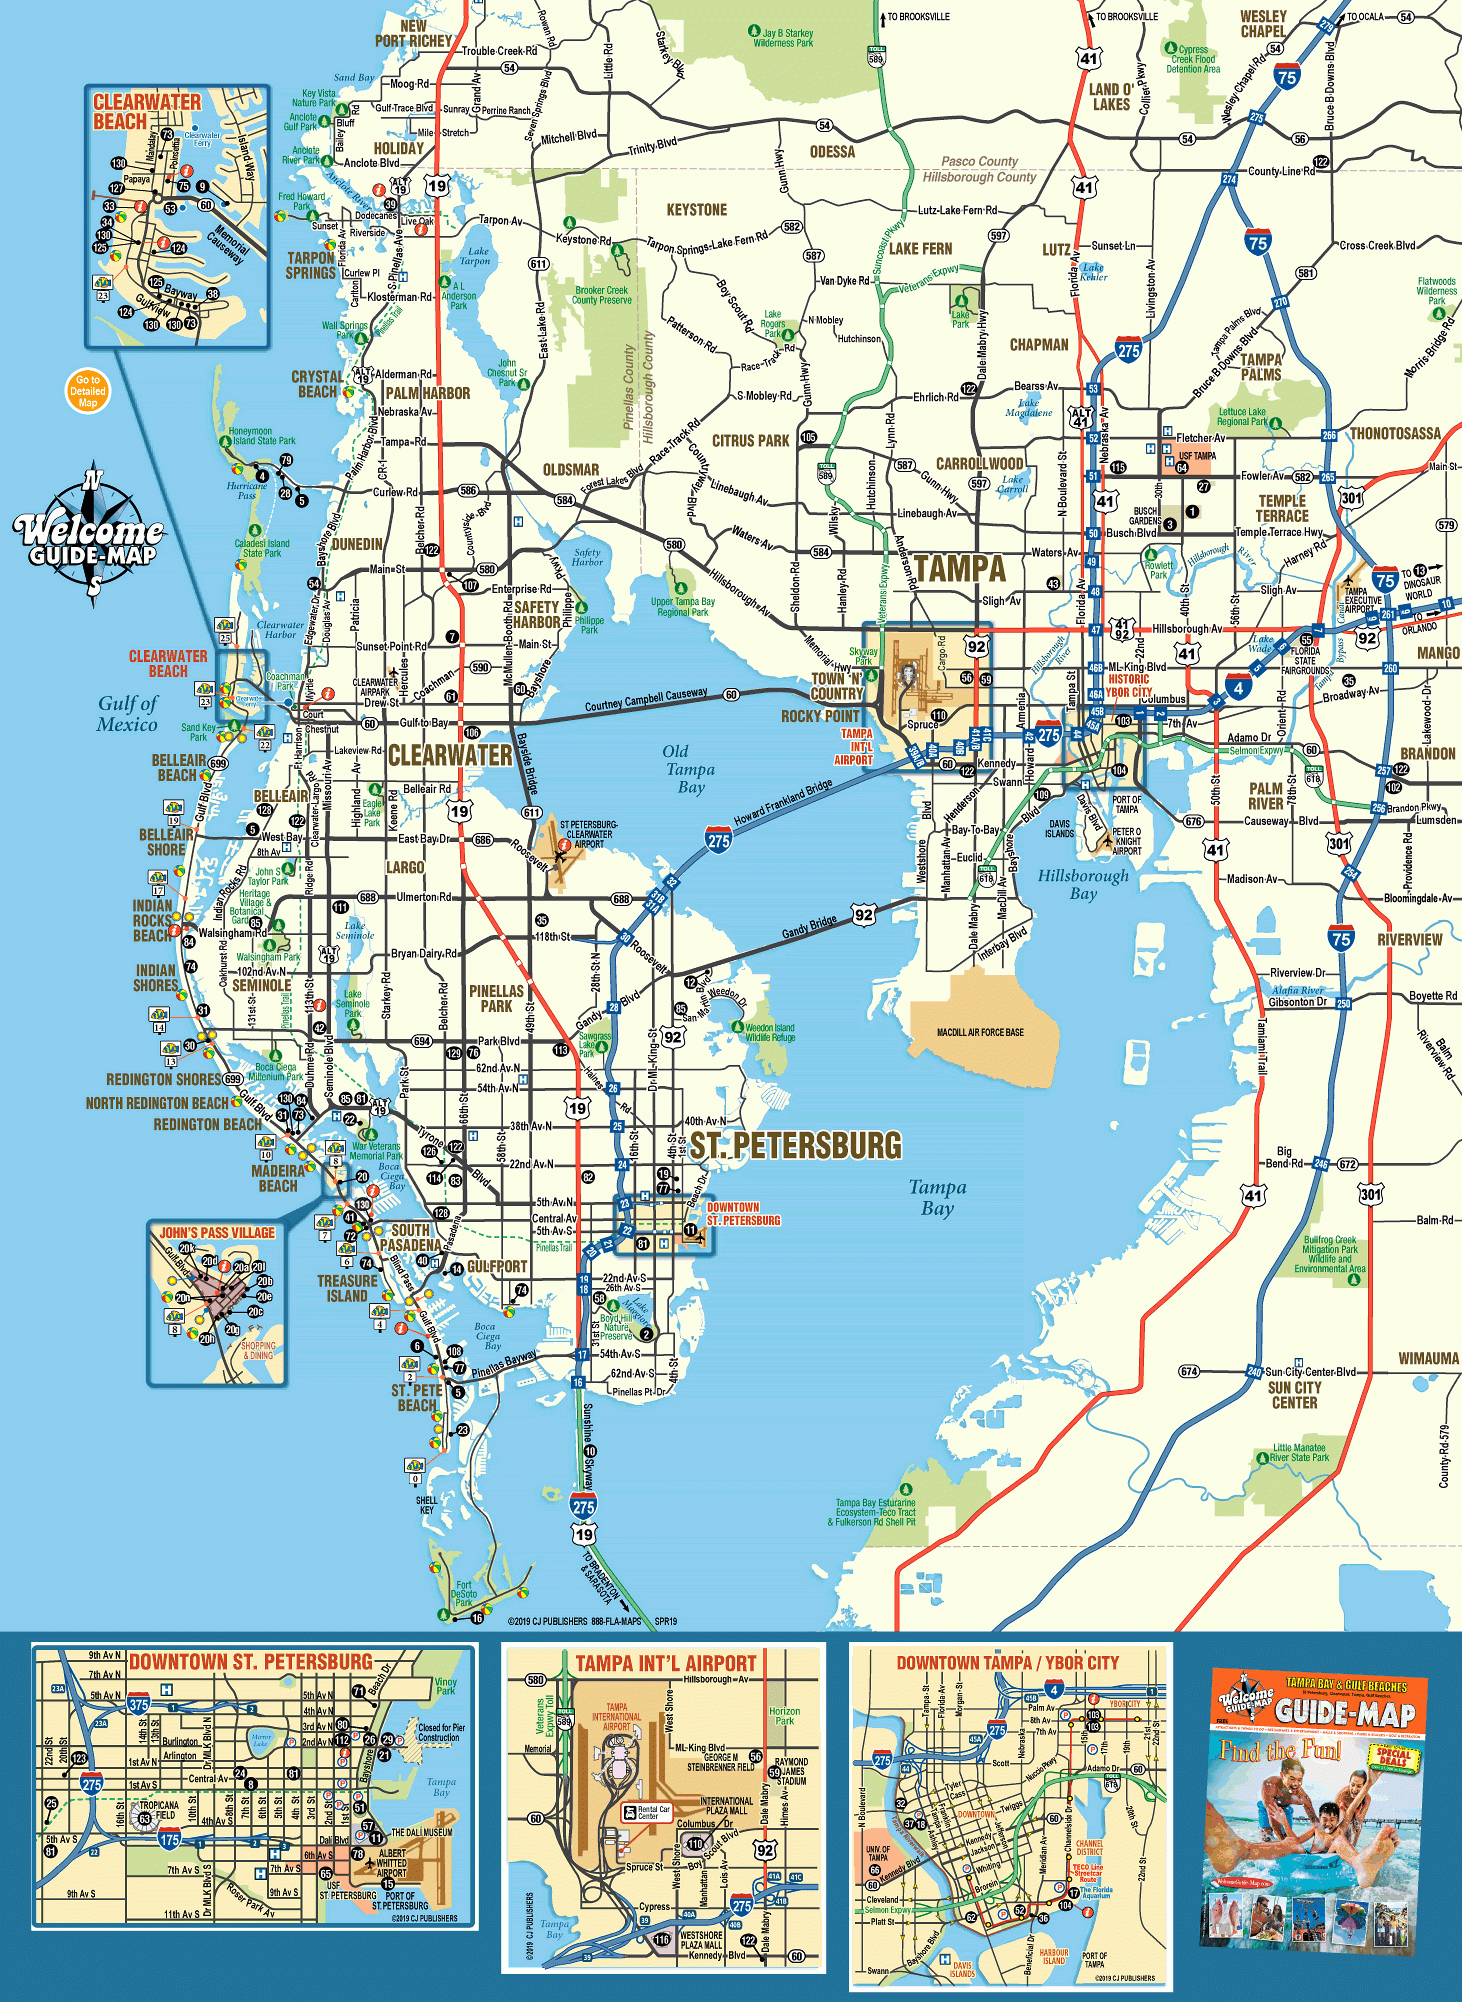 Map Of Tampa Bay Florida - Welcome Guide-Map To Tampa Bay Florida - St James Florida Map